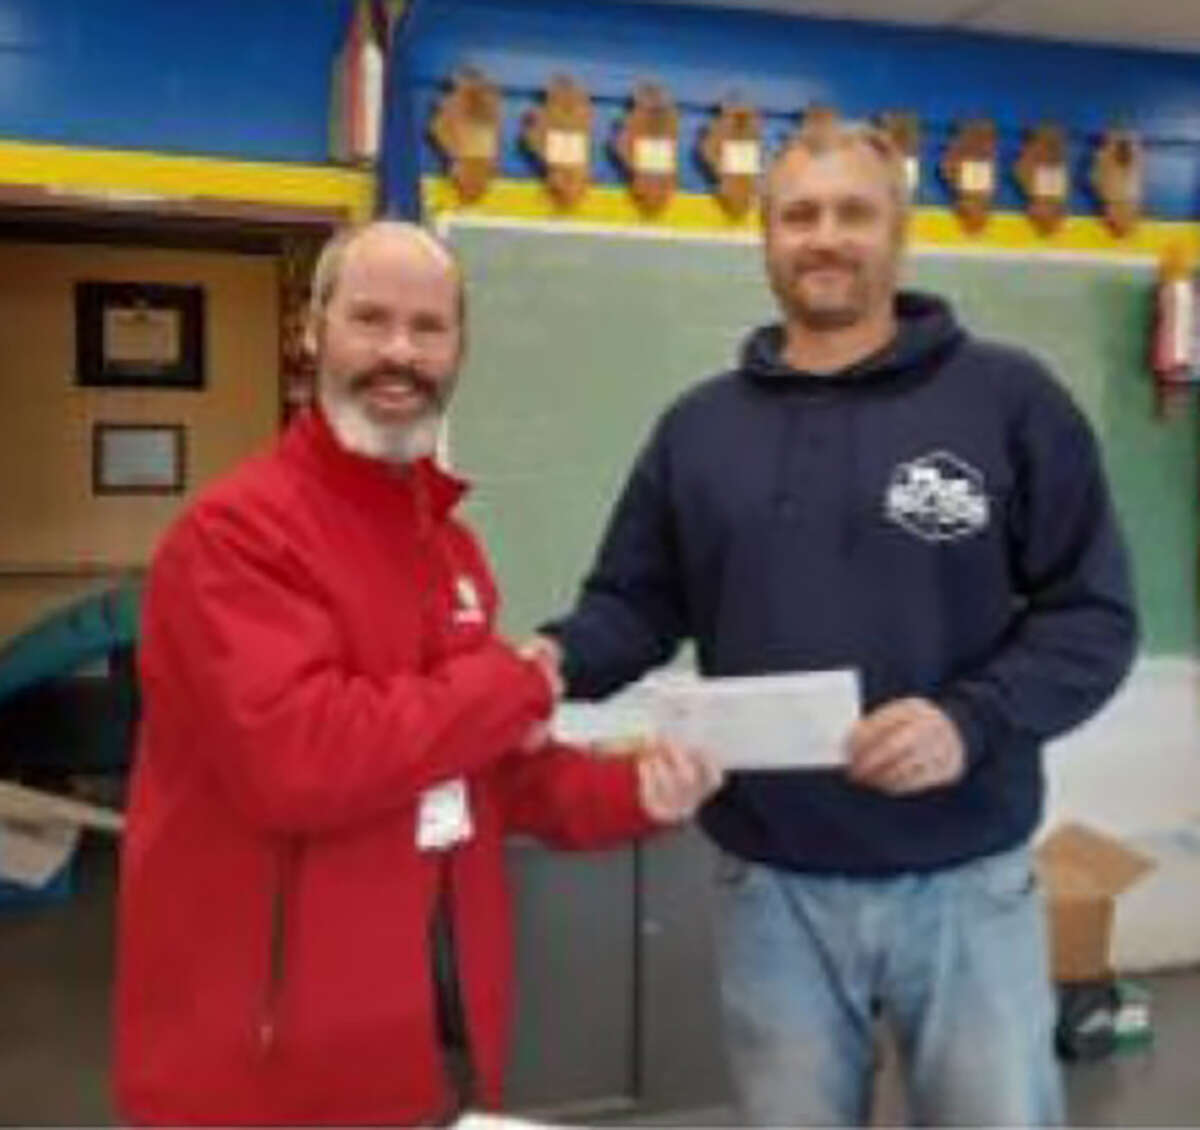 Buchheit of Jacksonville retail department manager and event coordinator Tim Weder (left) presents a check to Bryan Barnett, adviser for Winchester High School's FFA chapter. The check represented proceeds from Buchheit's annual FFA fundraiser.